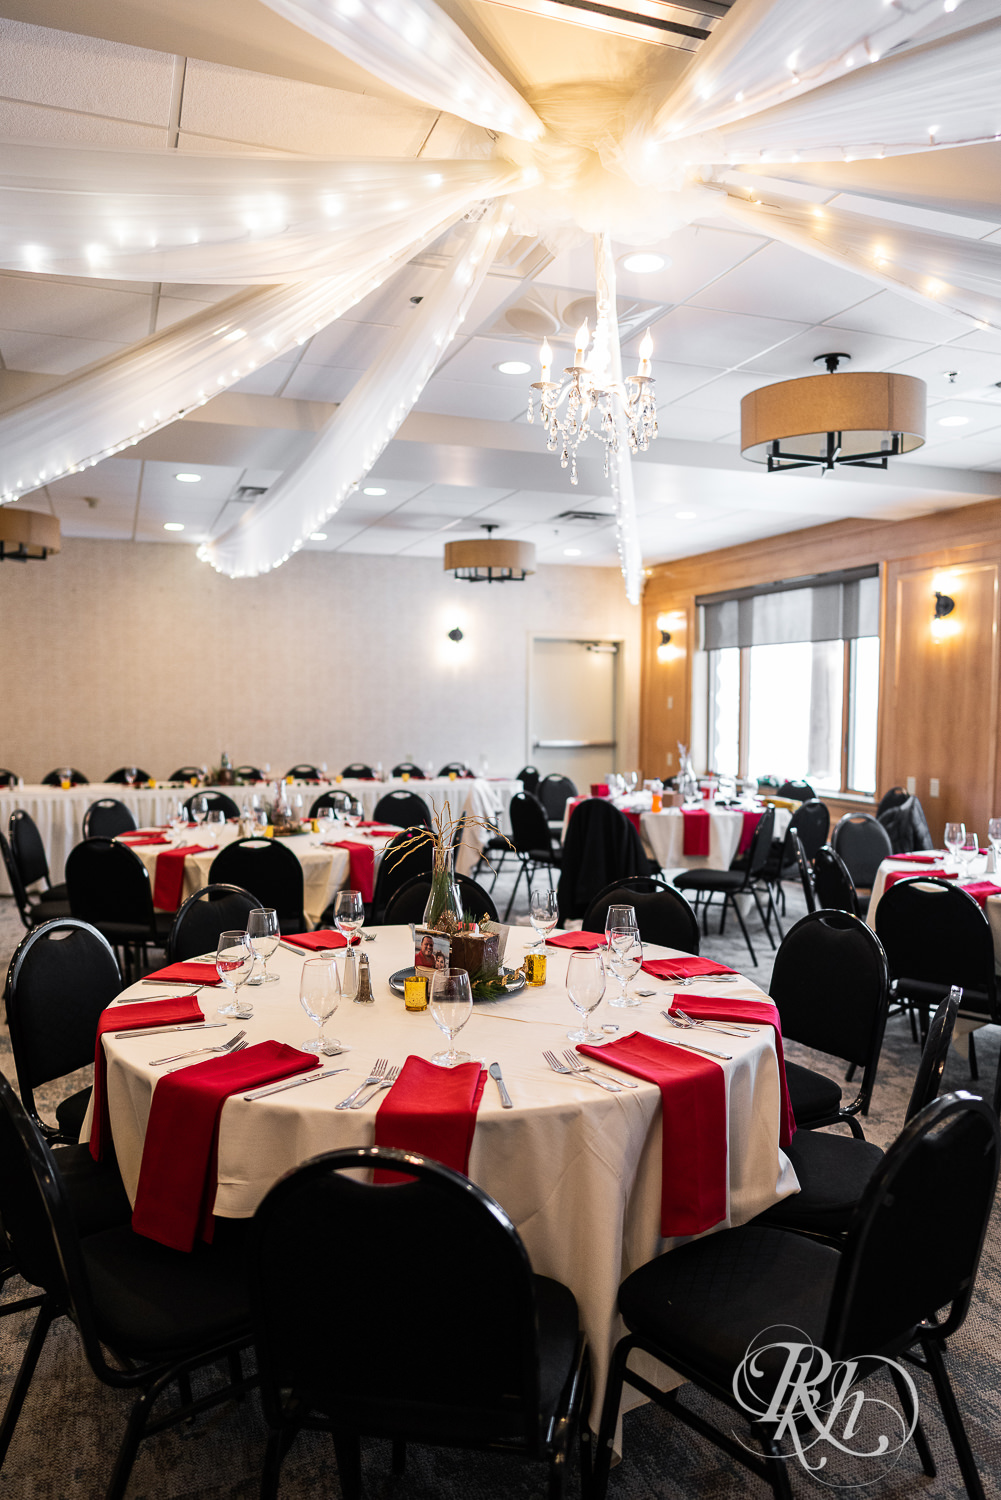 Winter wedding reception setup at Grand Superior Lodge in Two Harbors, Minnesota.